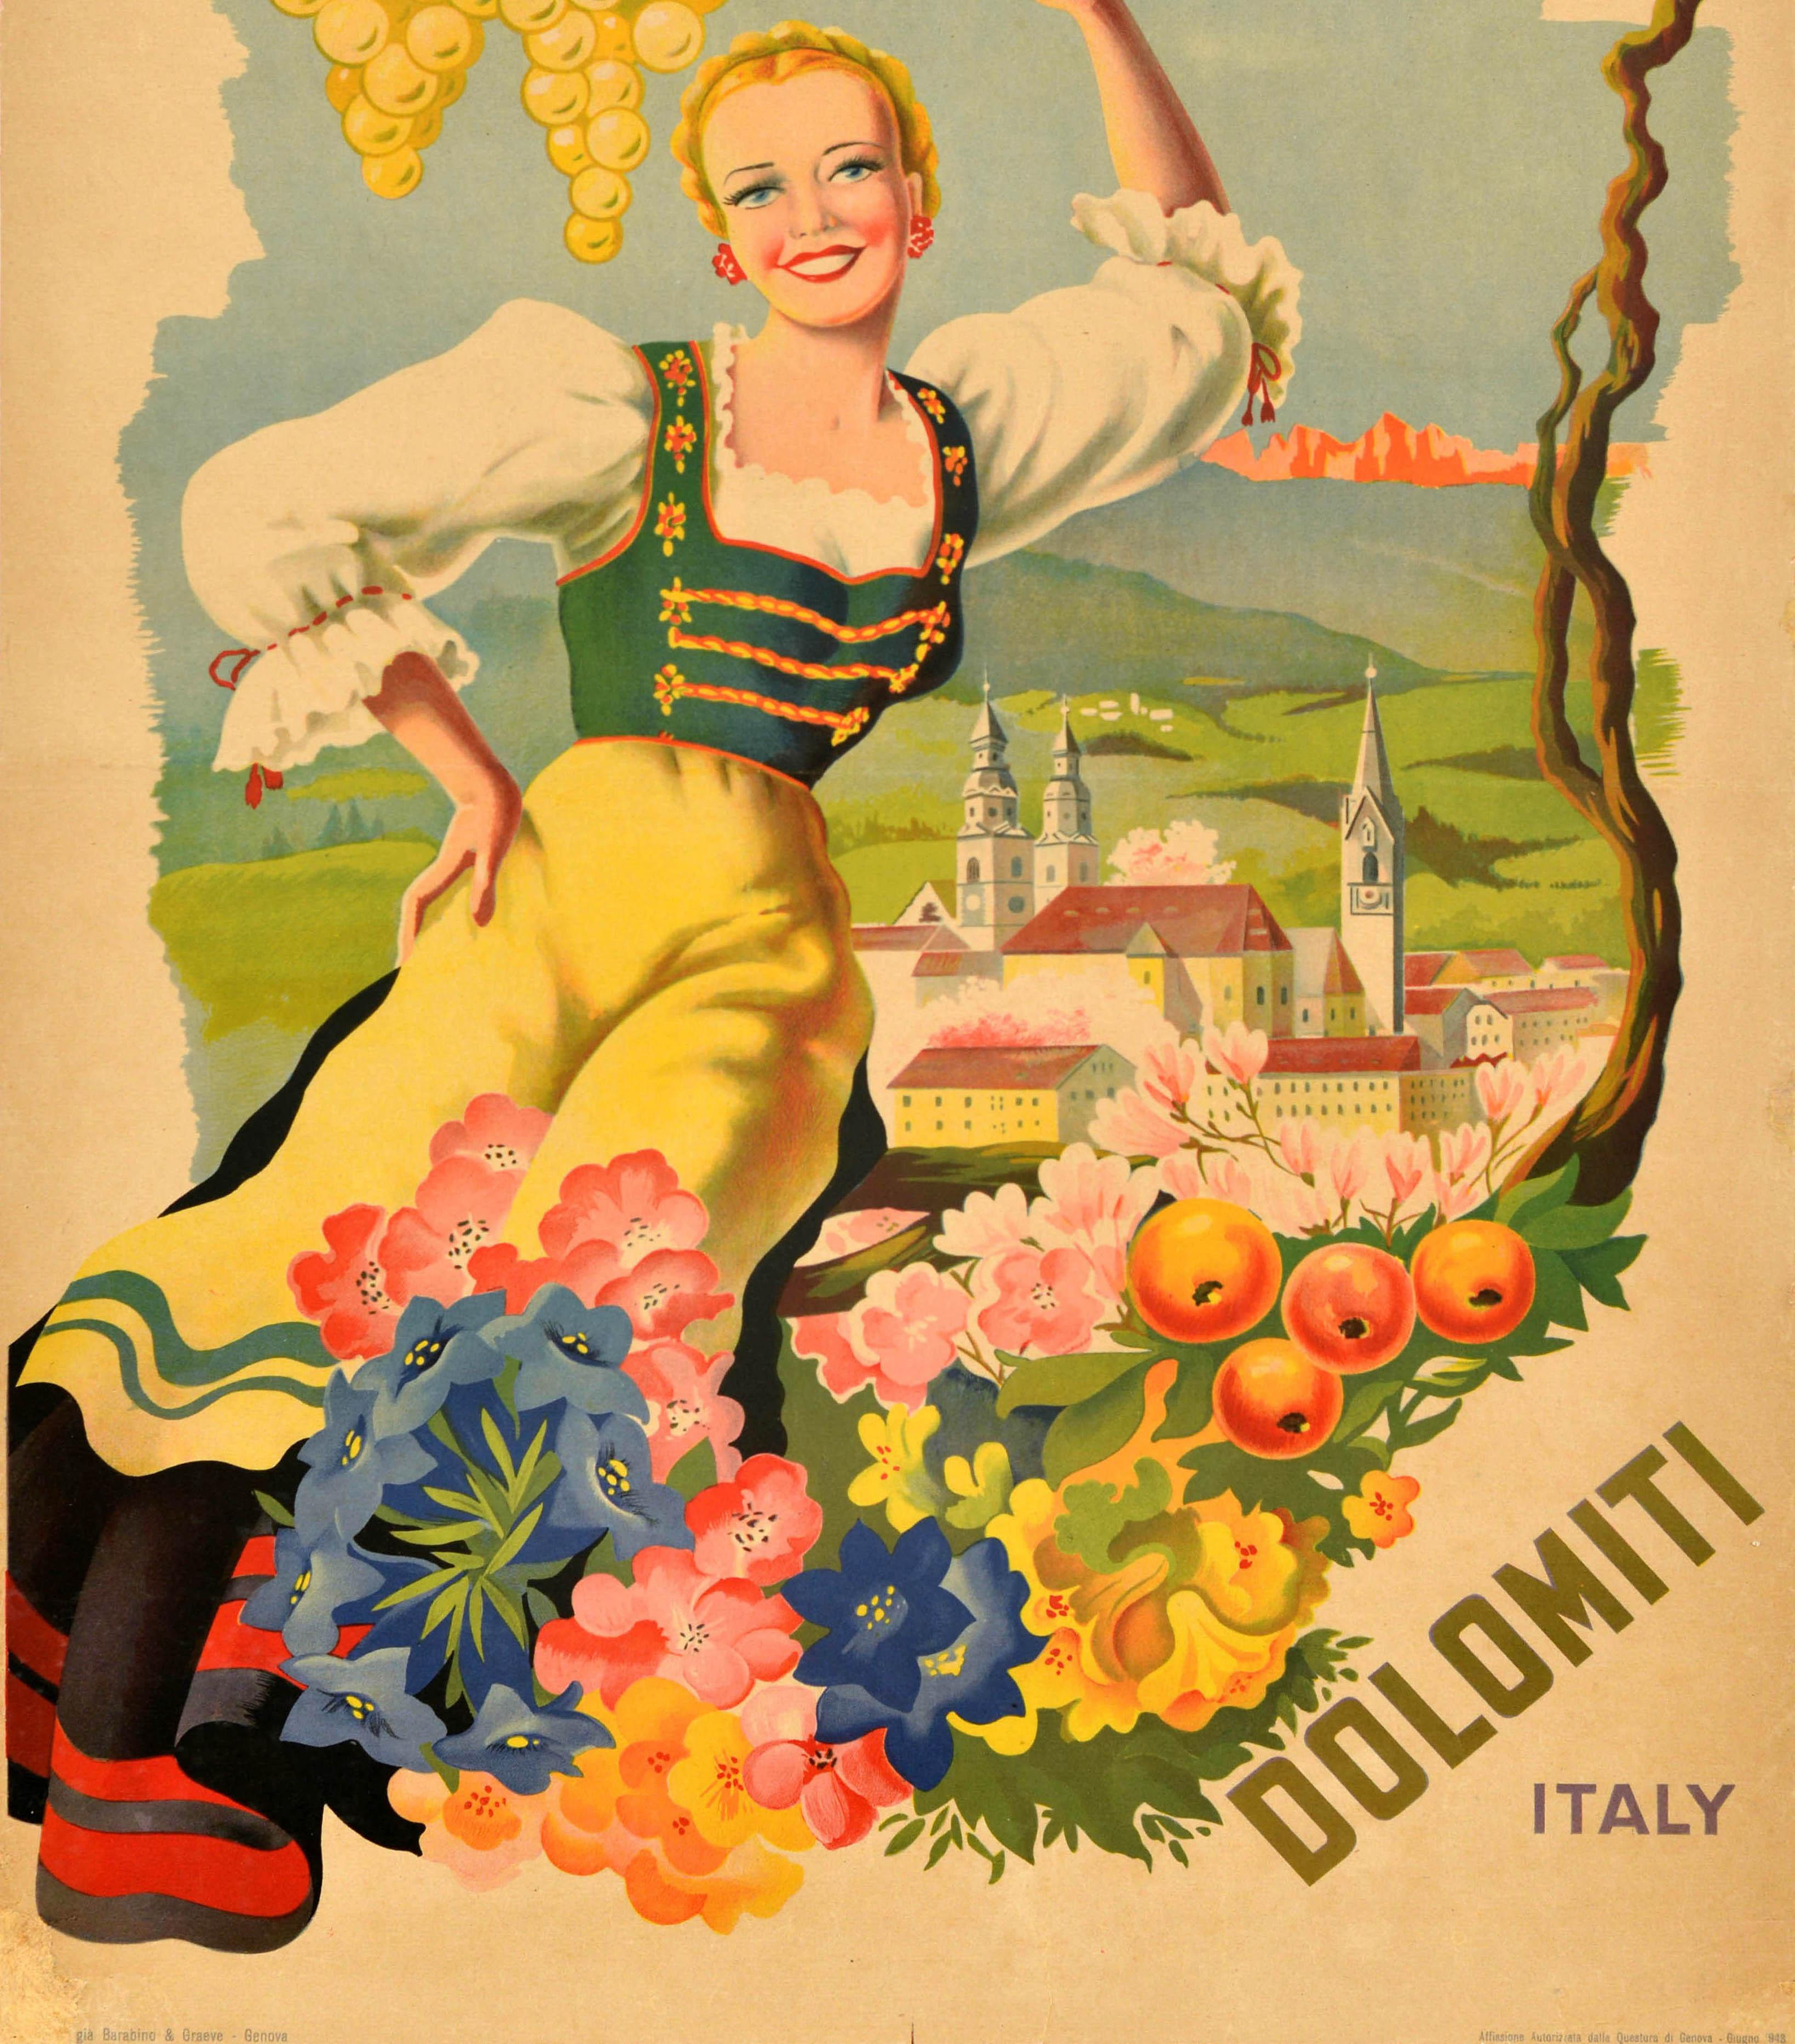 Original vintage travel advertising poster for Bressanone m.560 Dolomiti Italy / Brixen in the Dolomites featuring a colourful design by Filippo Romoli (1901-1969) depicting a smiling lady in traditional clothing holding a grapevine with grapes